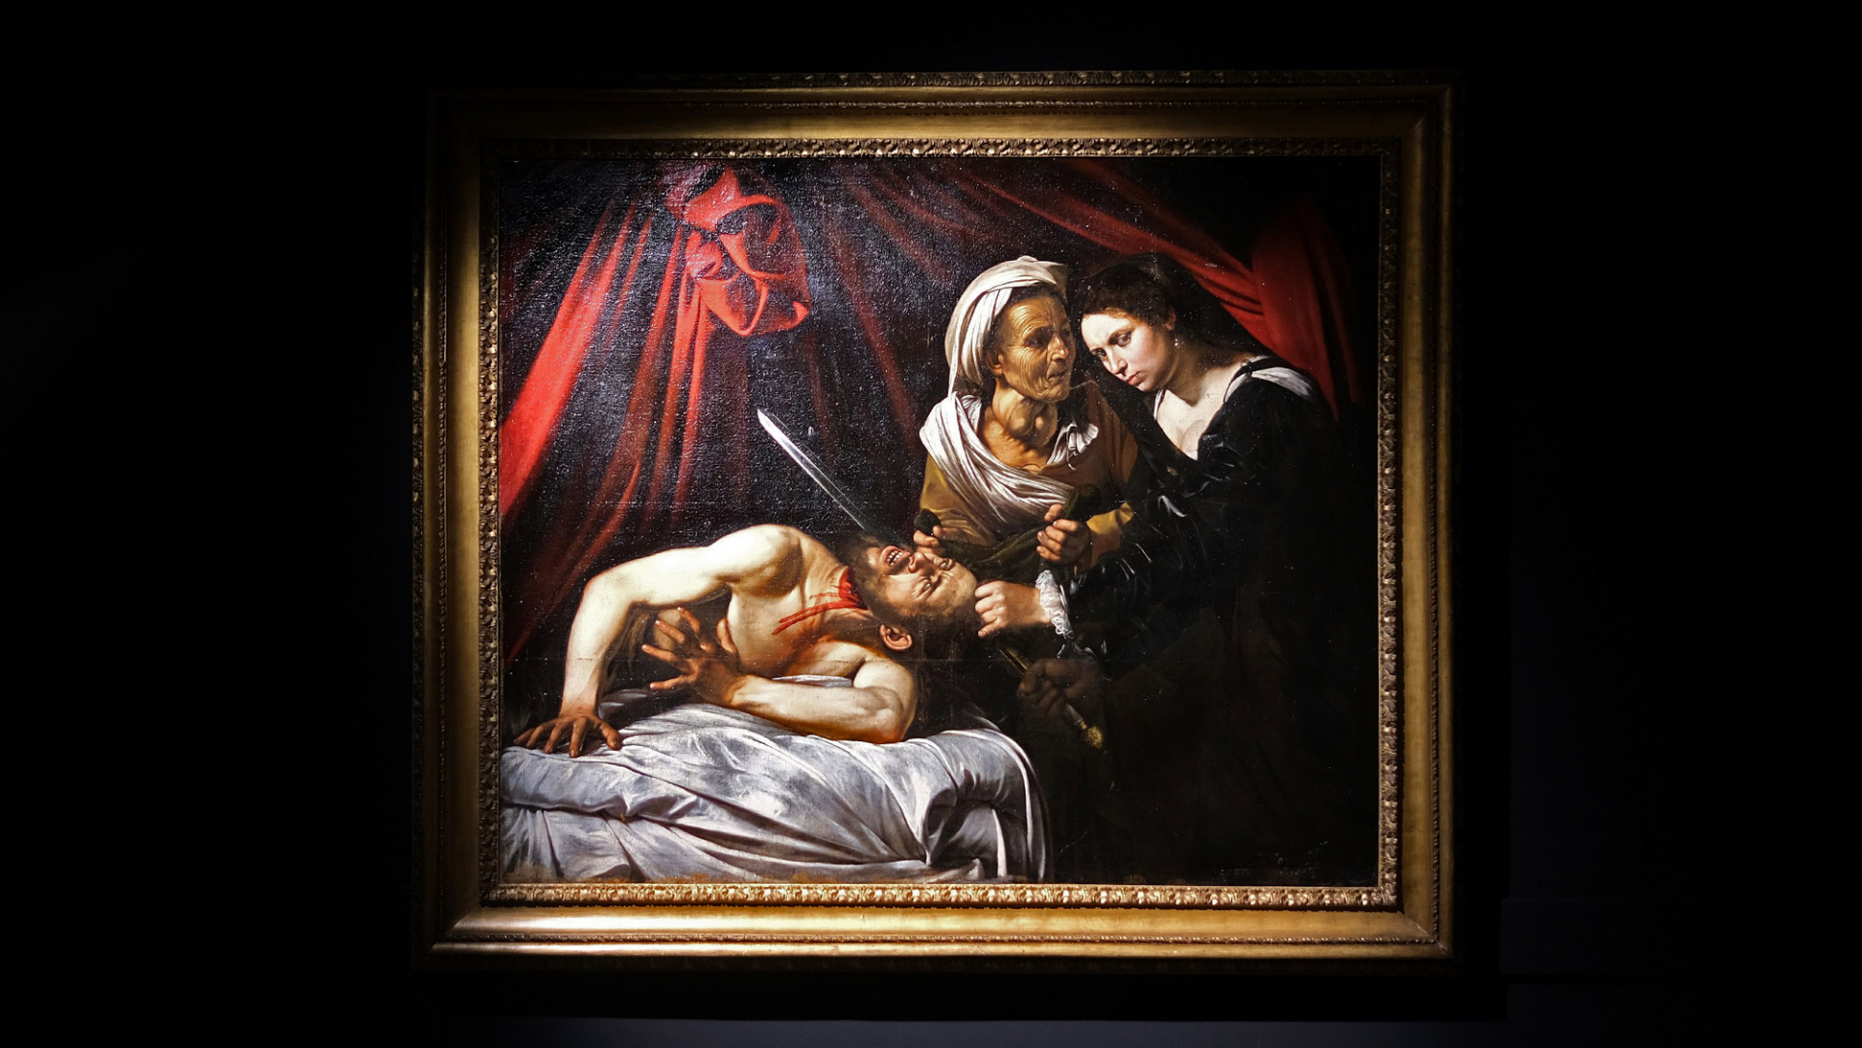 'Lost' Caravaggio painting worth $170M bought before auction — but is